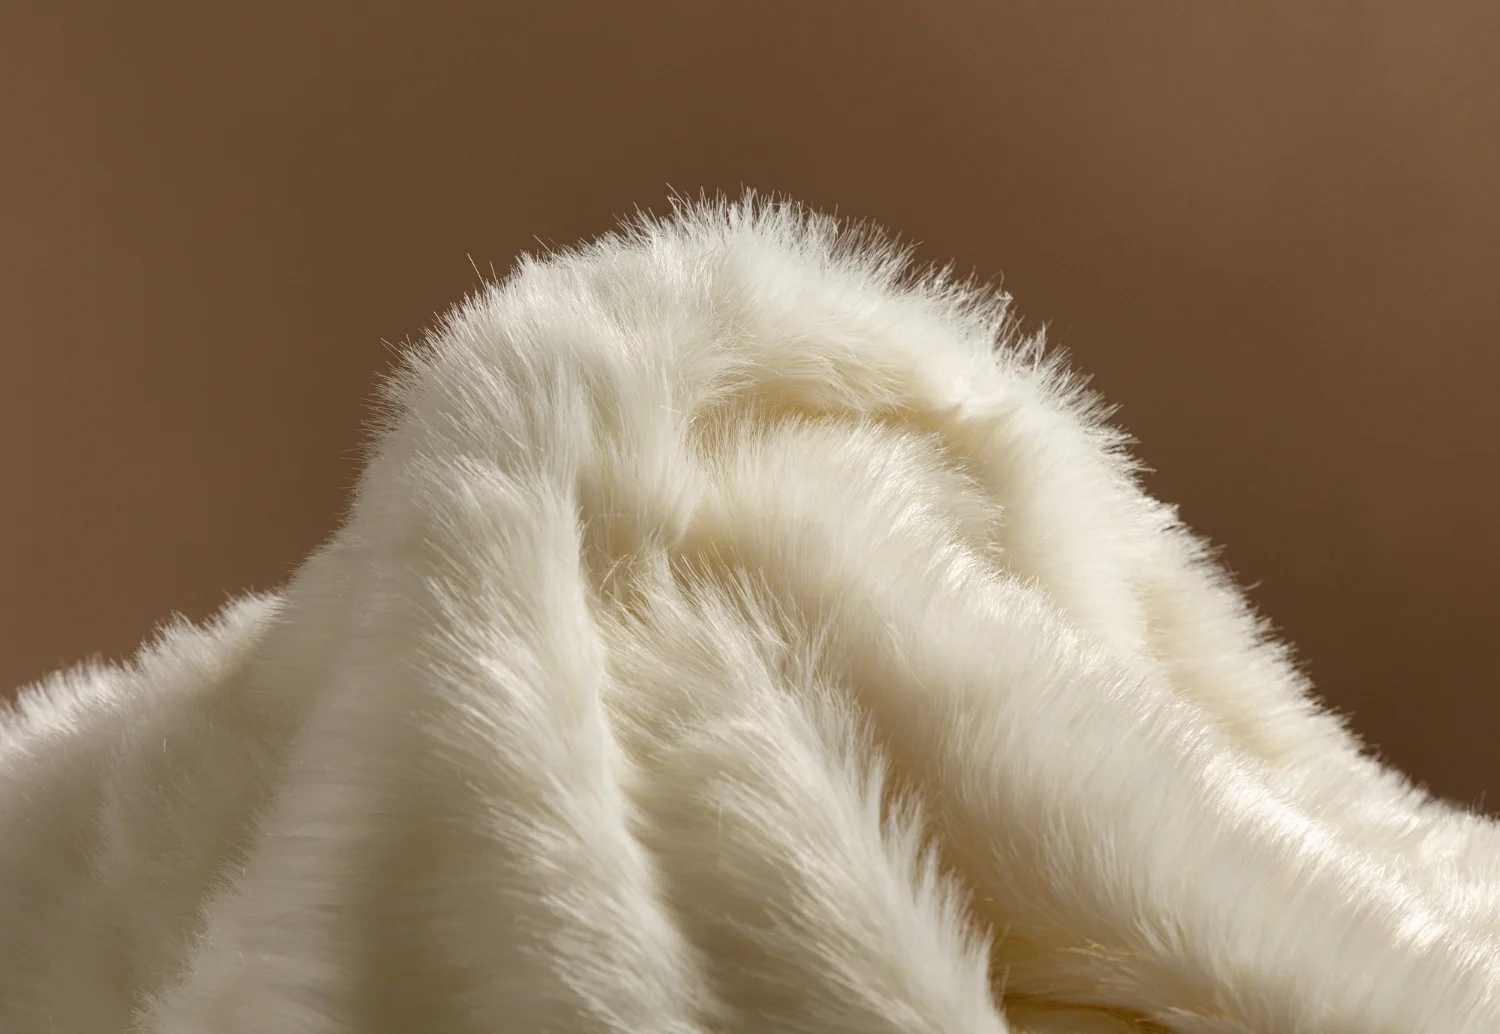 A close up of a white fur fabric on a brown background.